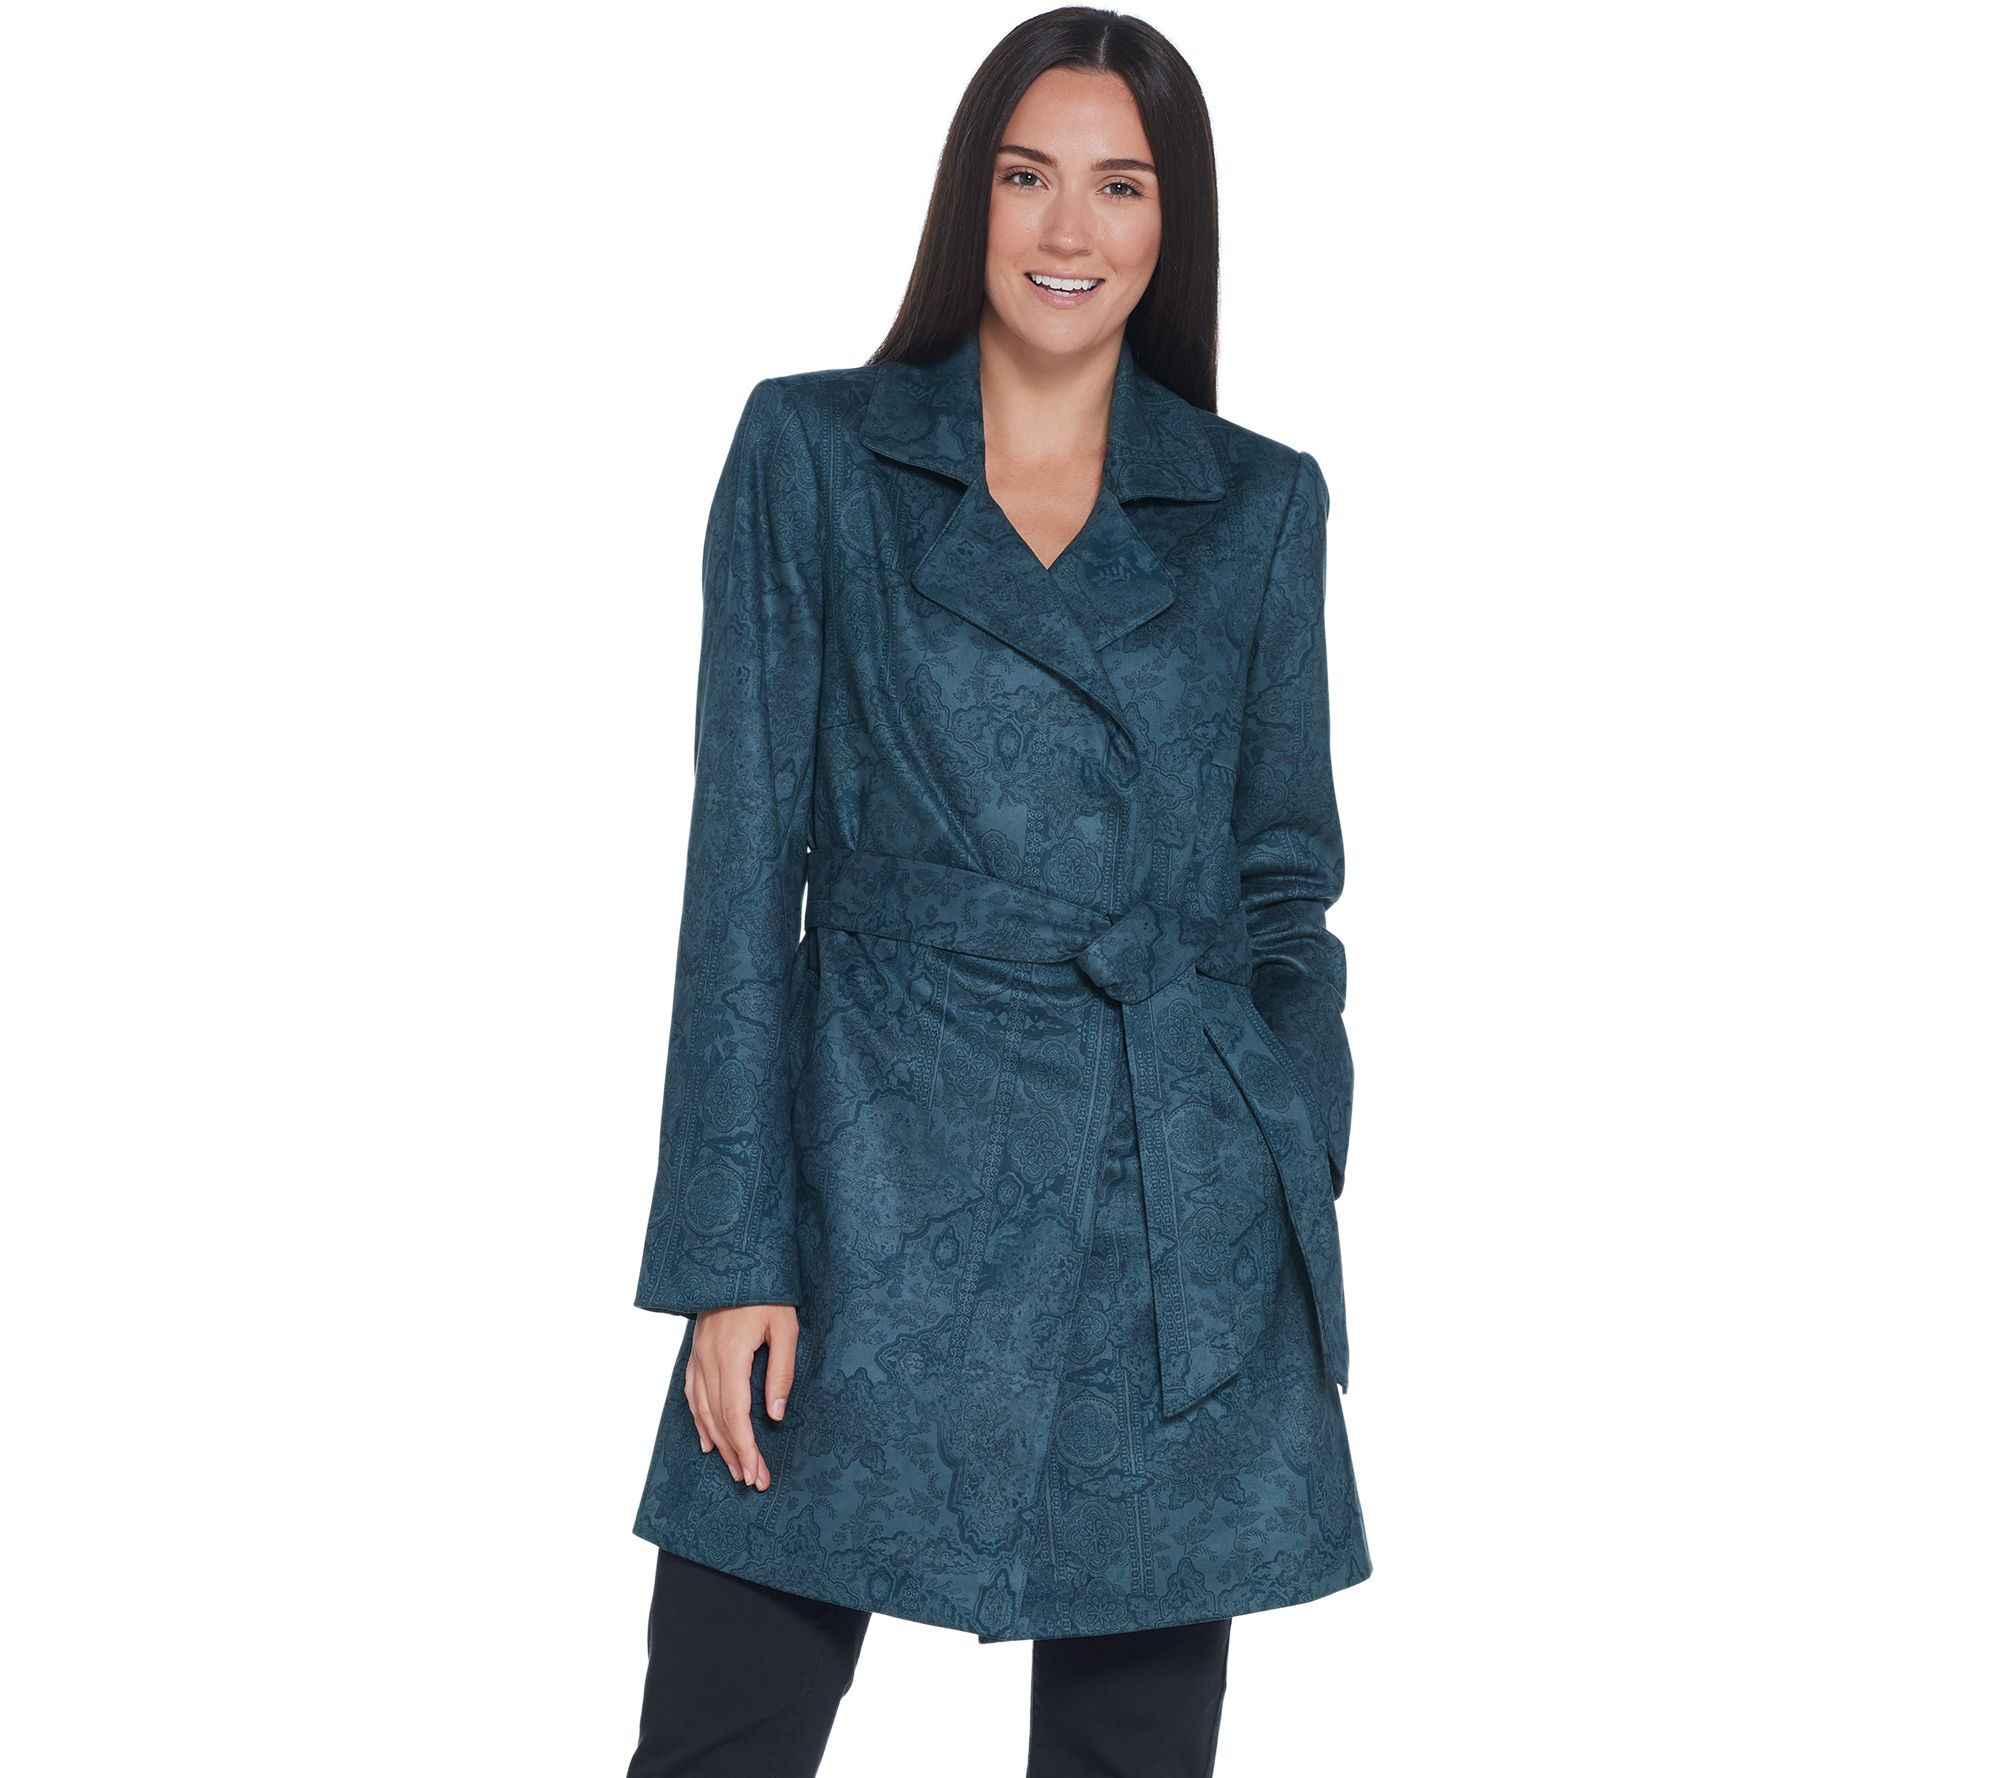 Faux Suede Belted Trench Coat